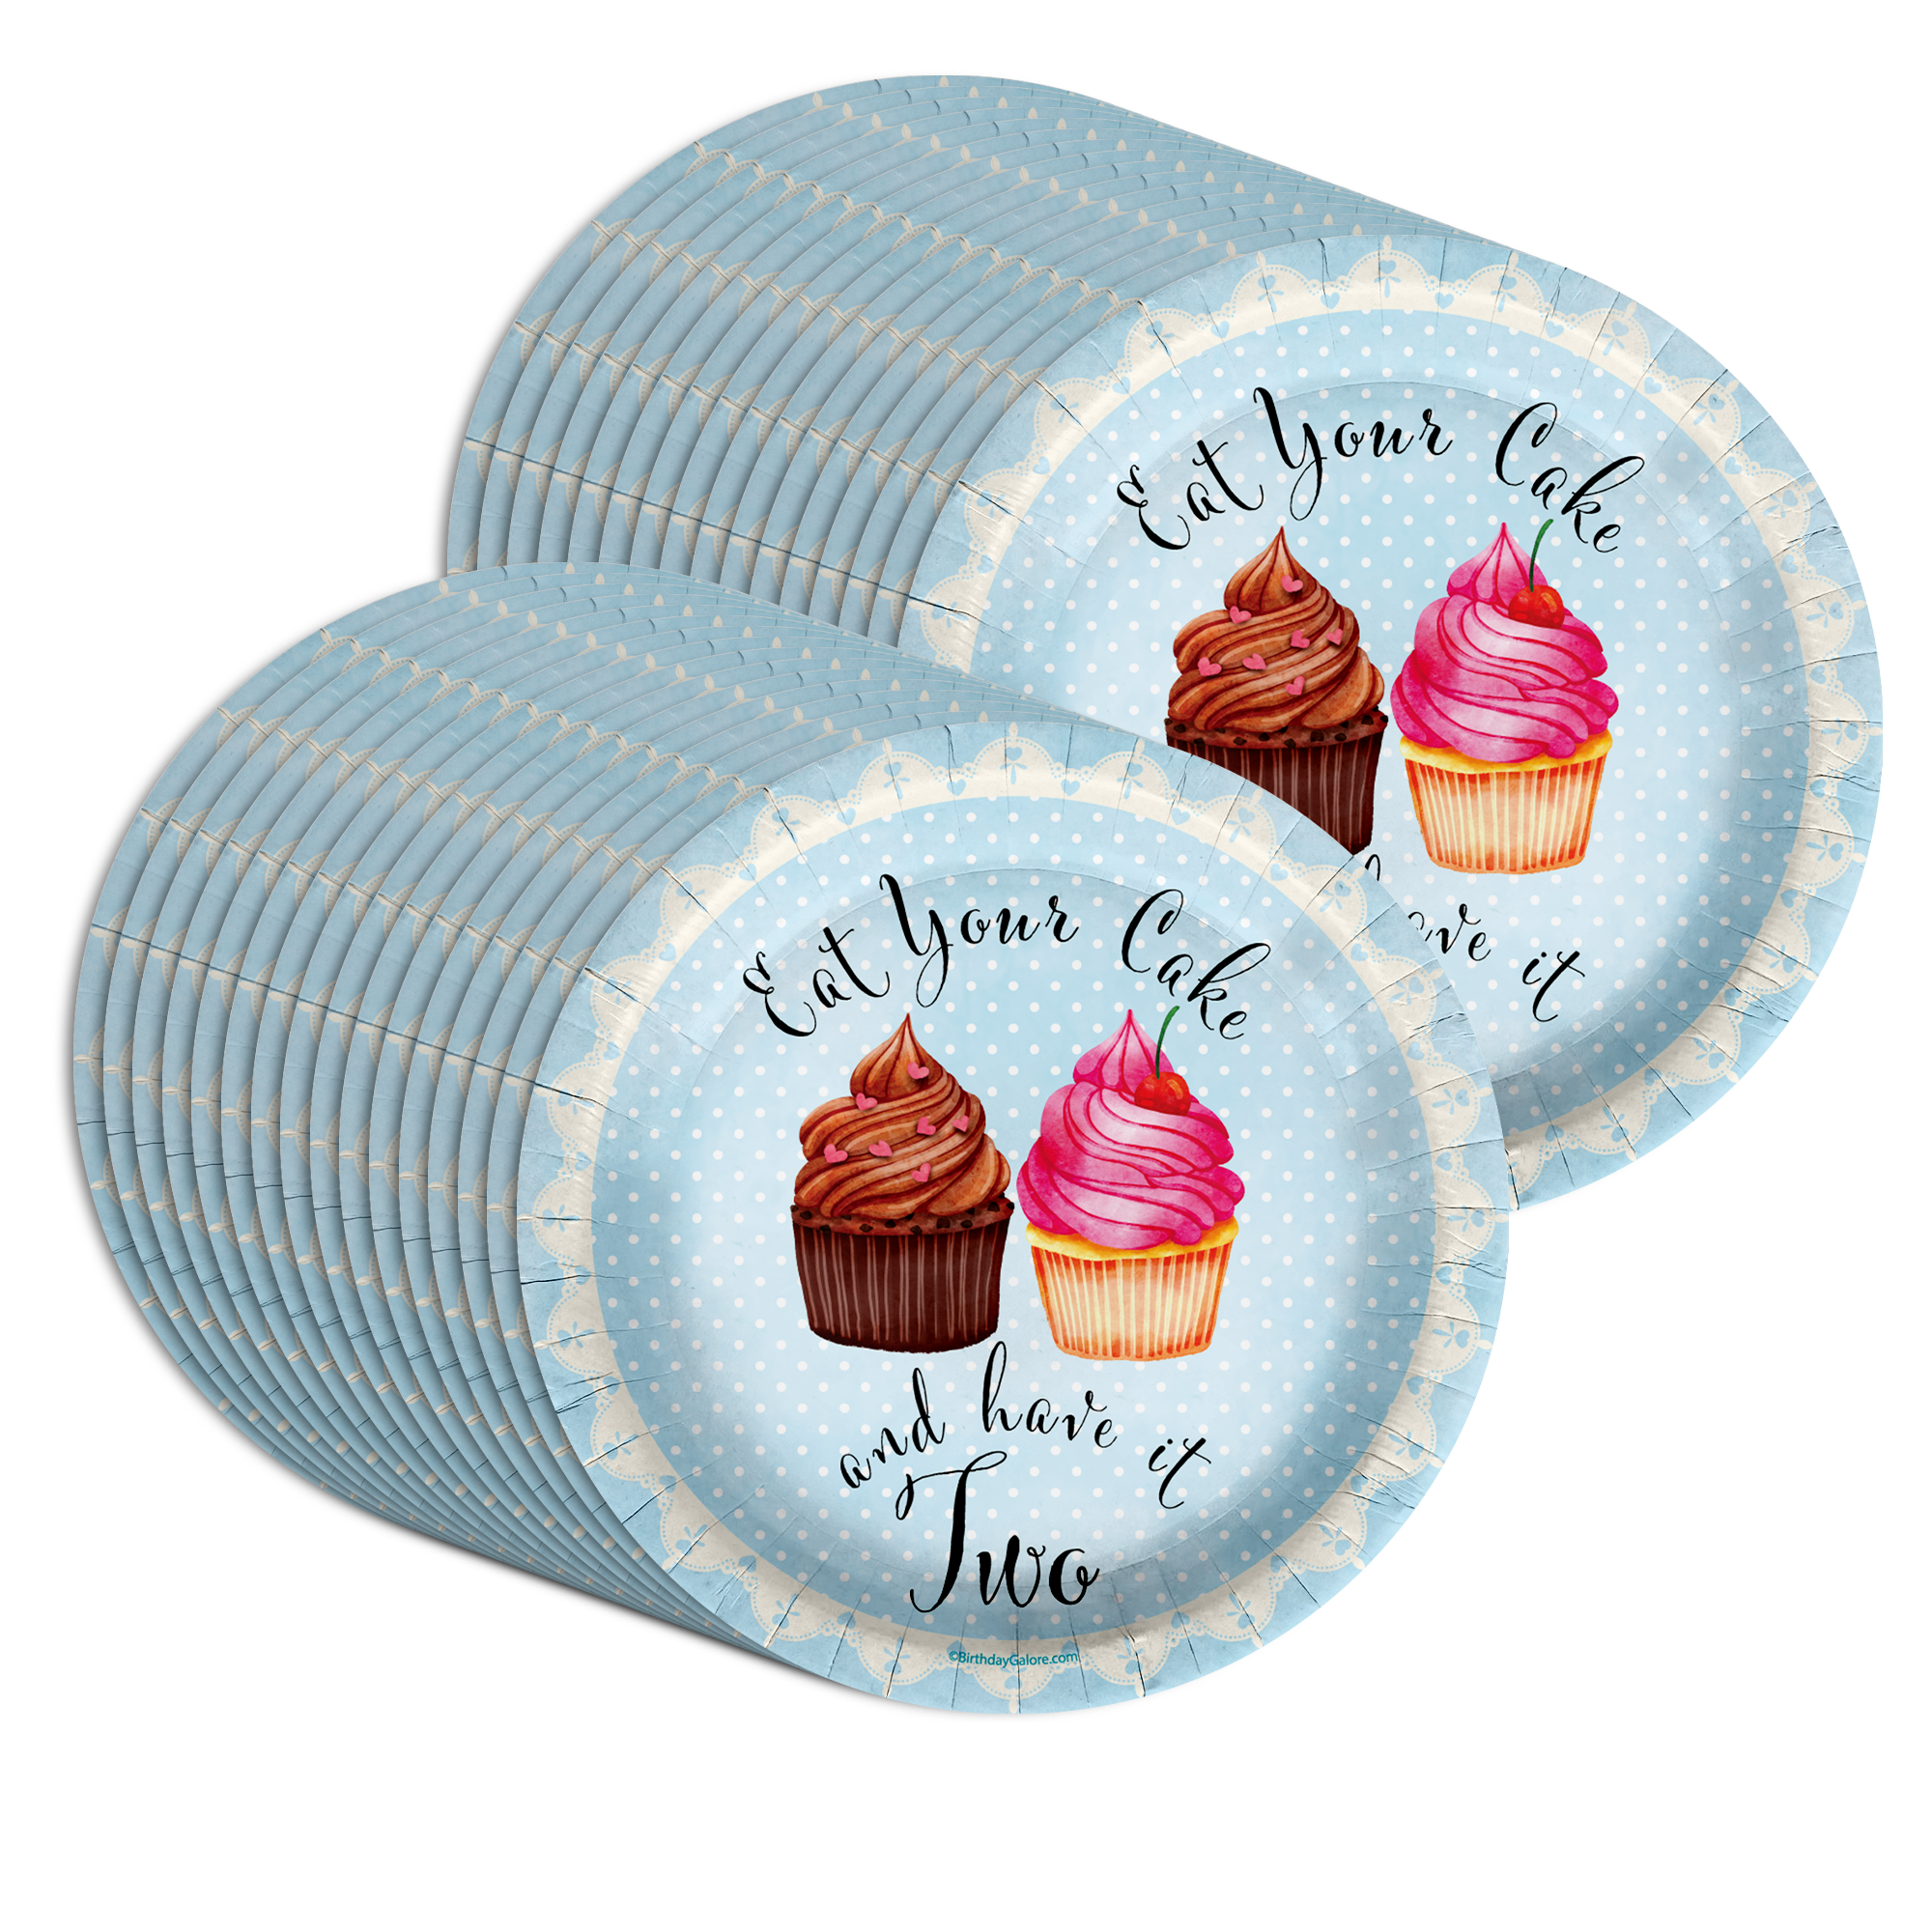 Eat Your Cake and Have it Two 2nd Birthday Party Supplies Large 9" Paper Plates in Bulk 32 Piece